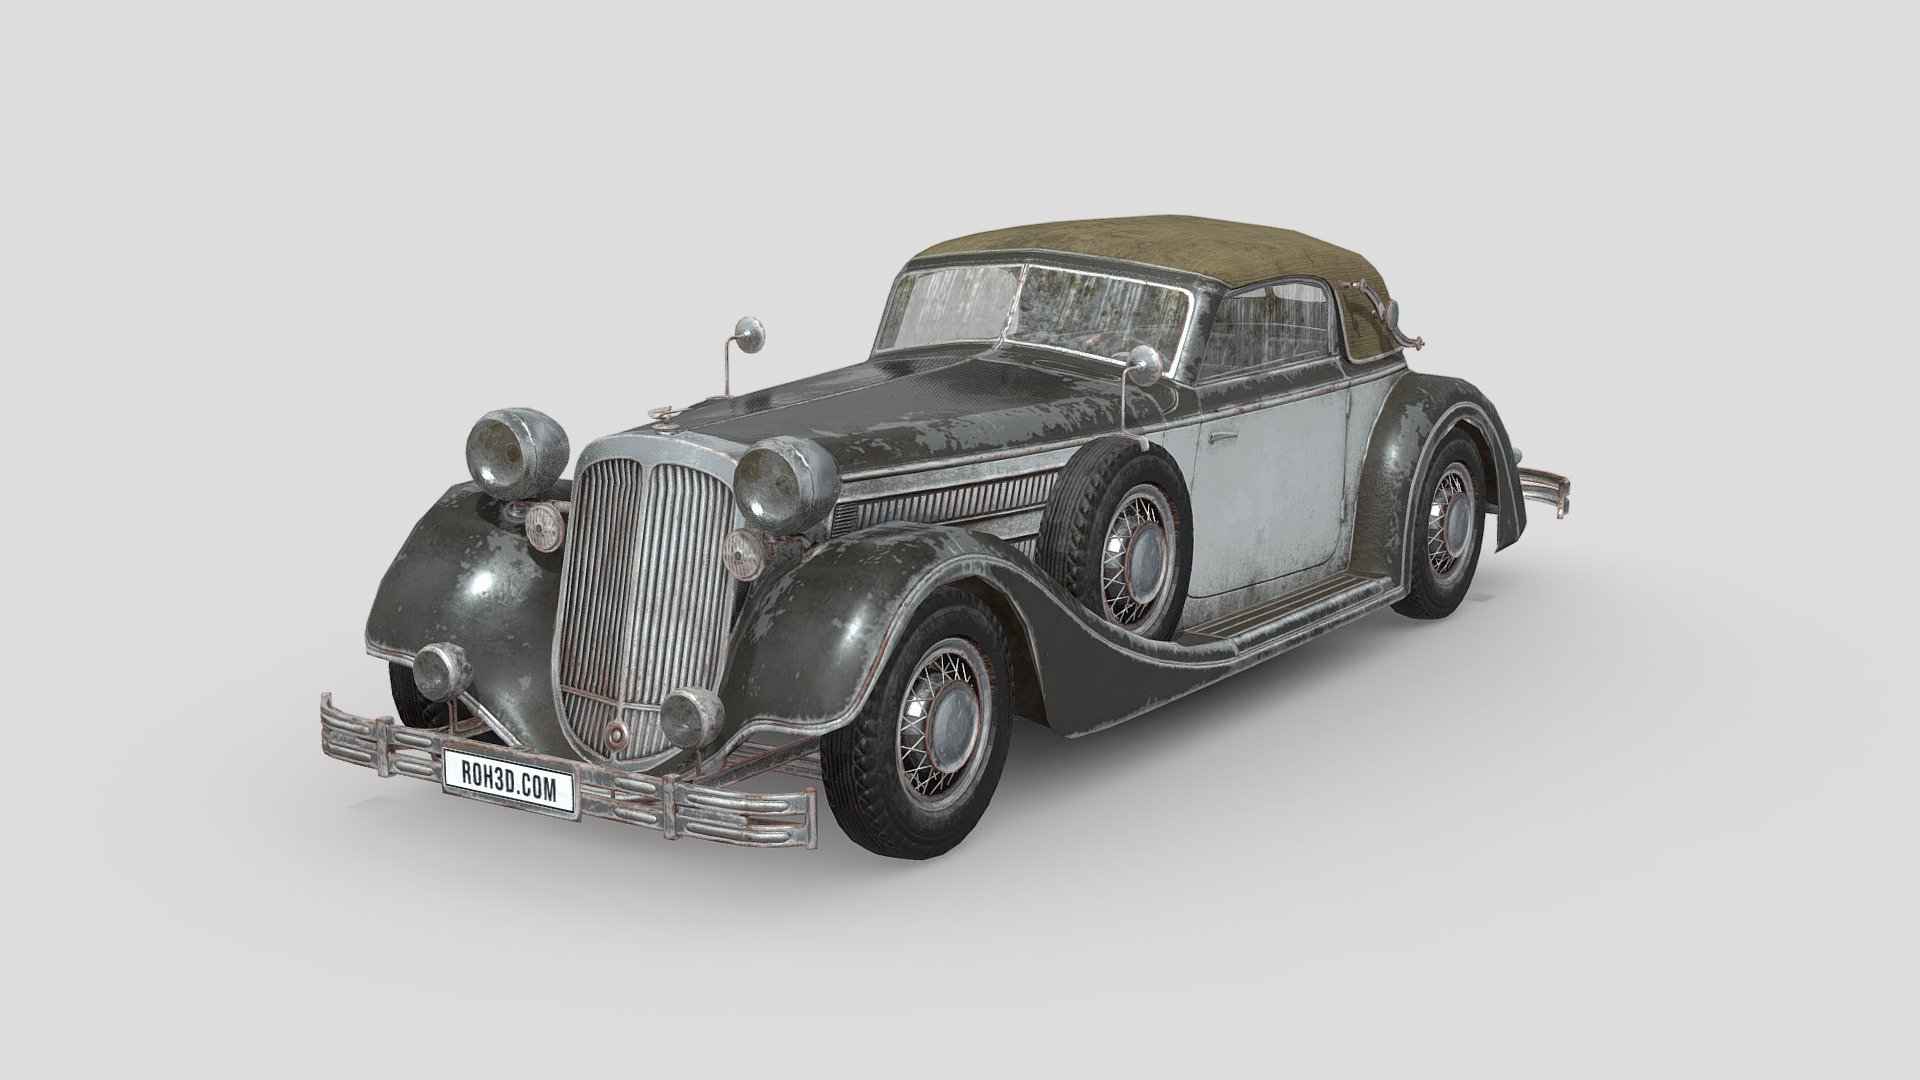 In 1937, the top model produced by Horch and all of the Auto Union conglomerate was the 853 A. It was a more powerful version of the 853 that was fitted with a 120 bhp version of the straight eight.

Many bodies on the 853 A were highly regarded, and of them the sport cabriolets are some of the most beautifully styled cars of their era. But the real creme of the crop were the select handful of ‘spezial’ roadsters built by Ermann et Rossi in Paris.

Before the war broke out and annihilated all of Auto Union with it, Horch produced just over 400 853As that were fitted with a wide variety of bodies 3d model